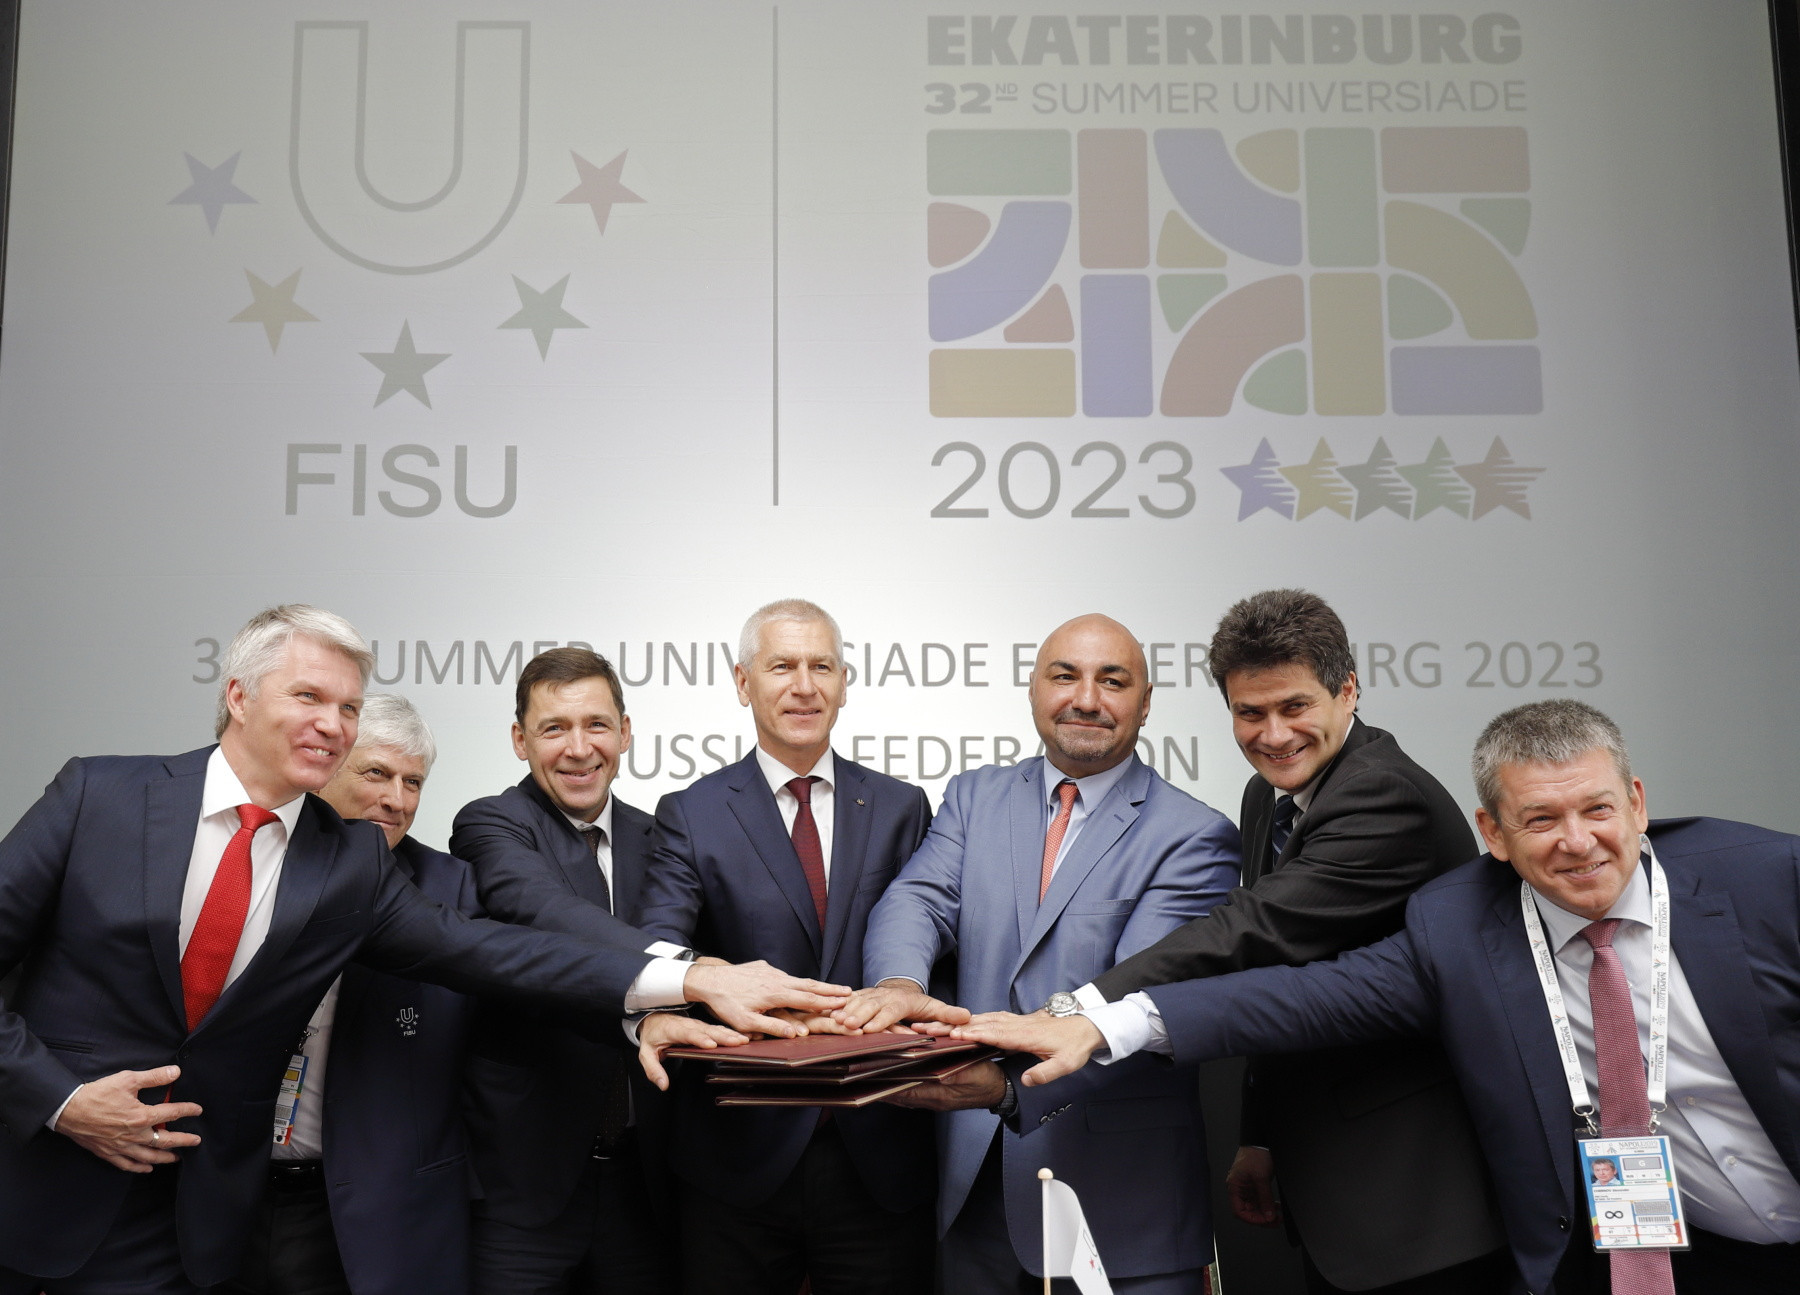 Yekateringburg was awarded the 2023 Summer Universiade at the International University Sports Federation's Executive Committee meeting in Naples - competition is already hotting up for the 2025 event ©FISU